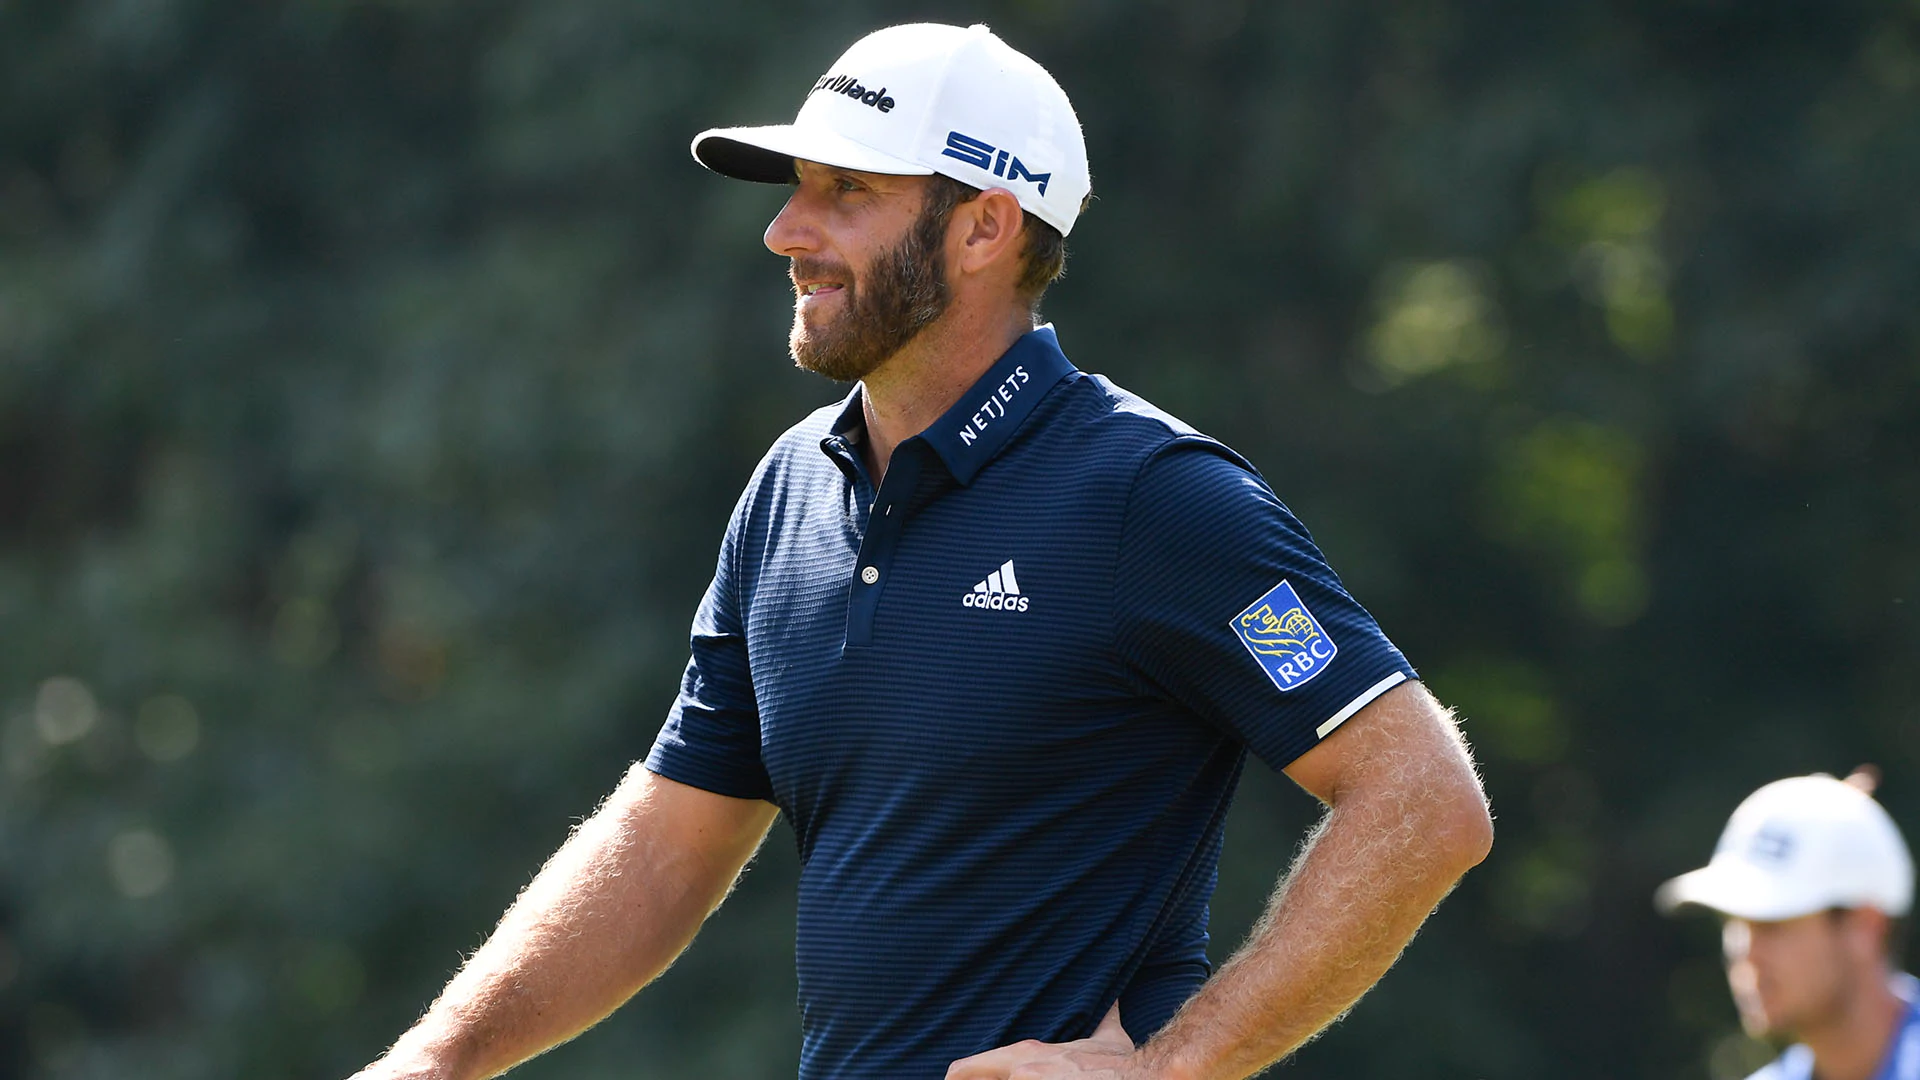 Dustin Johnson ‘very proud’ to regain world No. 1 spot after Northern Trust win